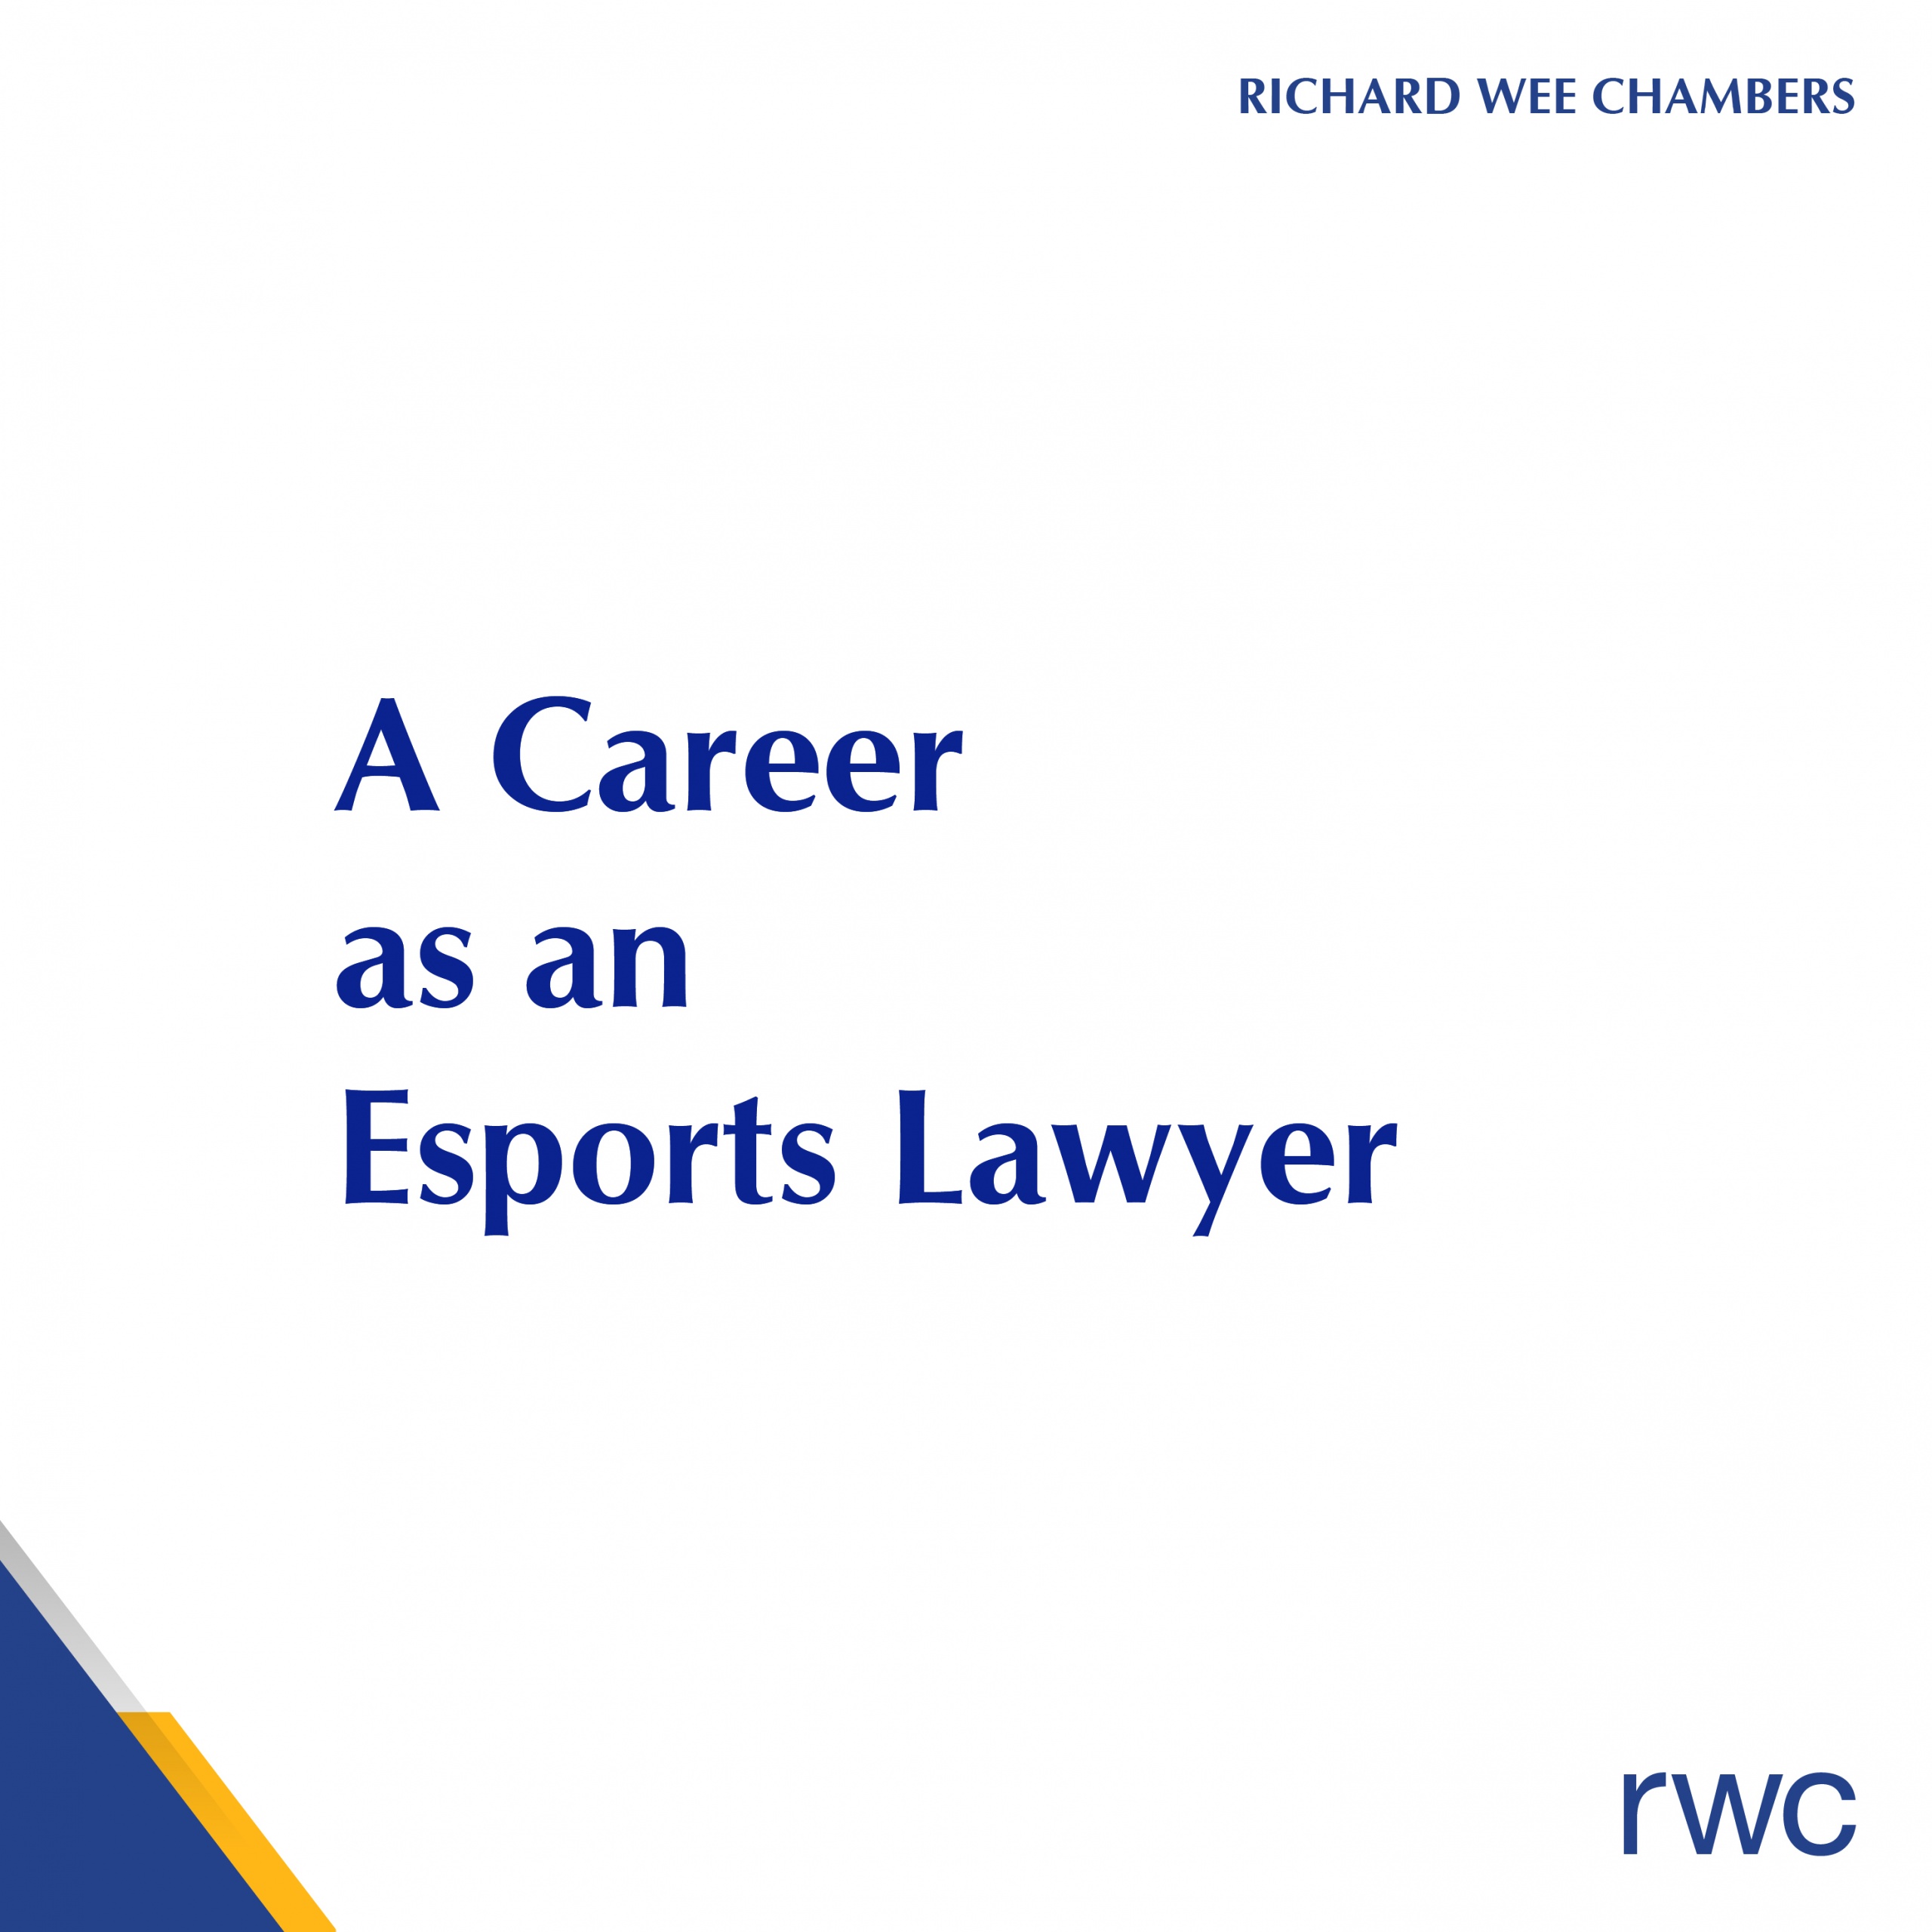 A Career as an Esports lawyer - Richard Wee Chambers